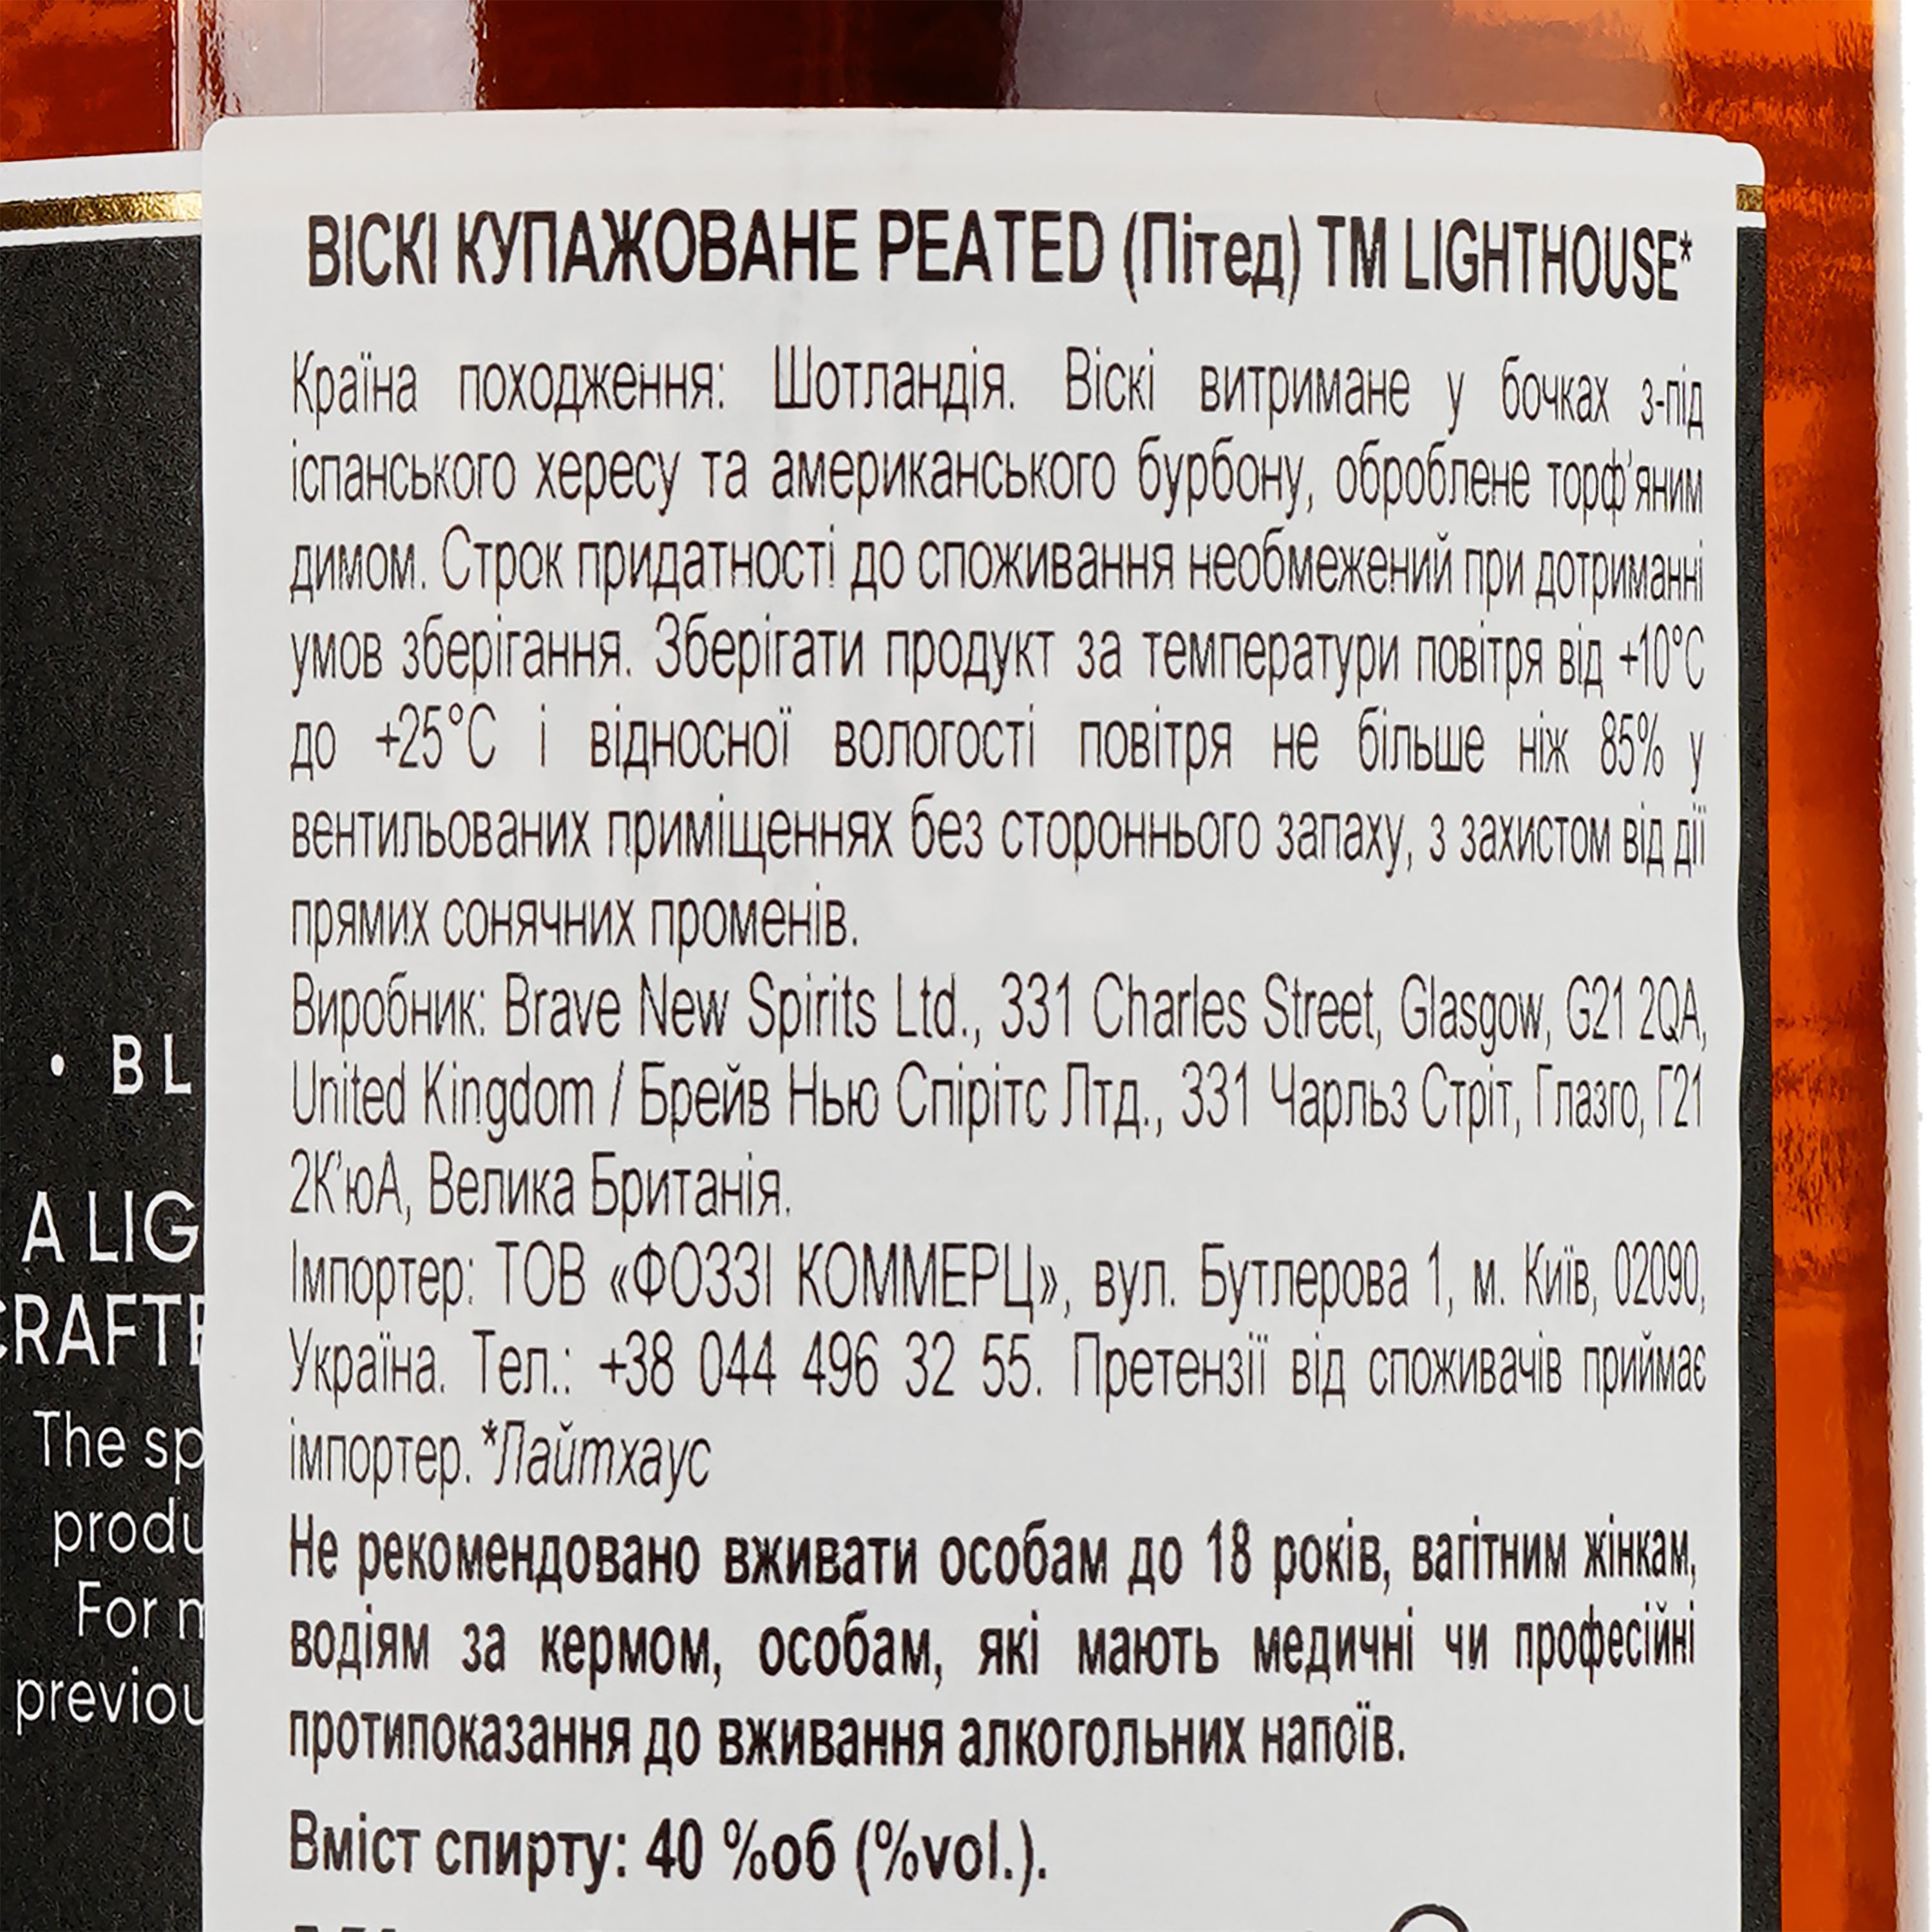 Виски Lighthouse Blended Scotch Whisky Peated 40% 0.7 л - фото 3